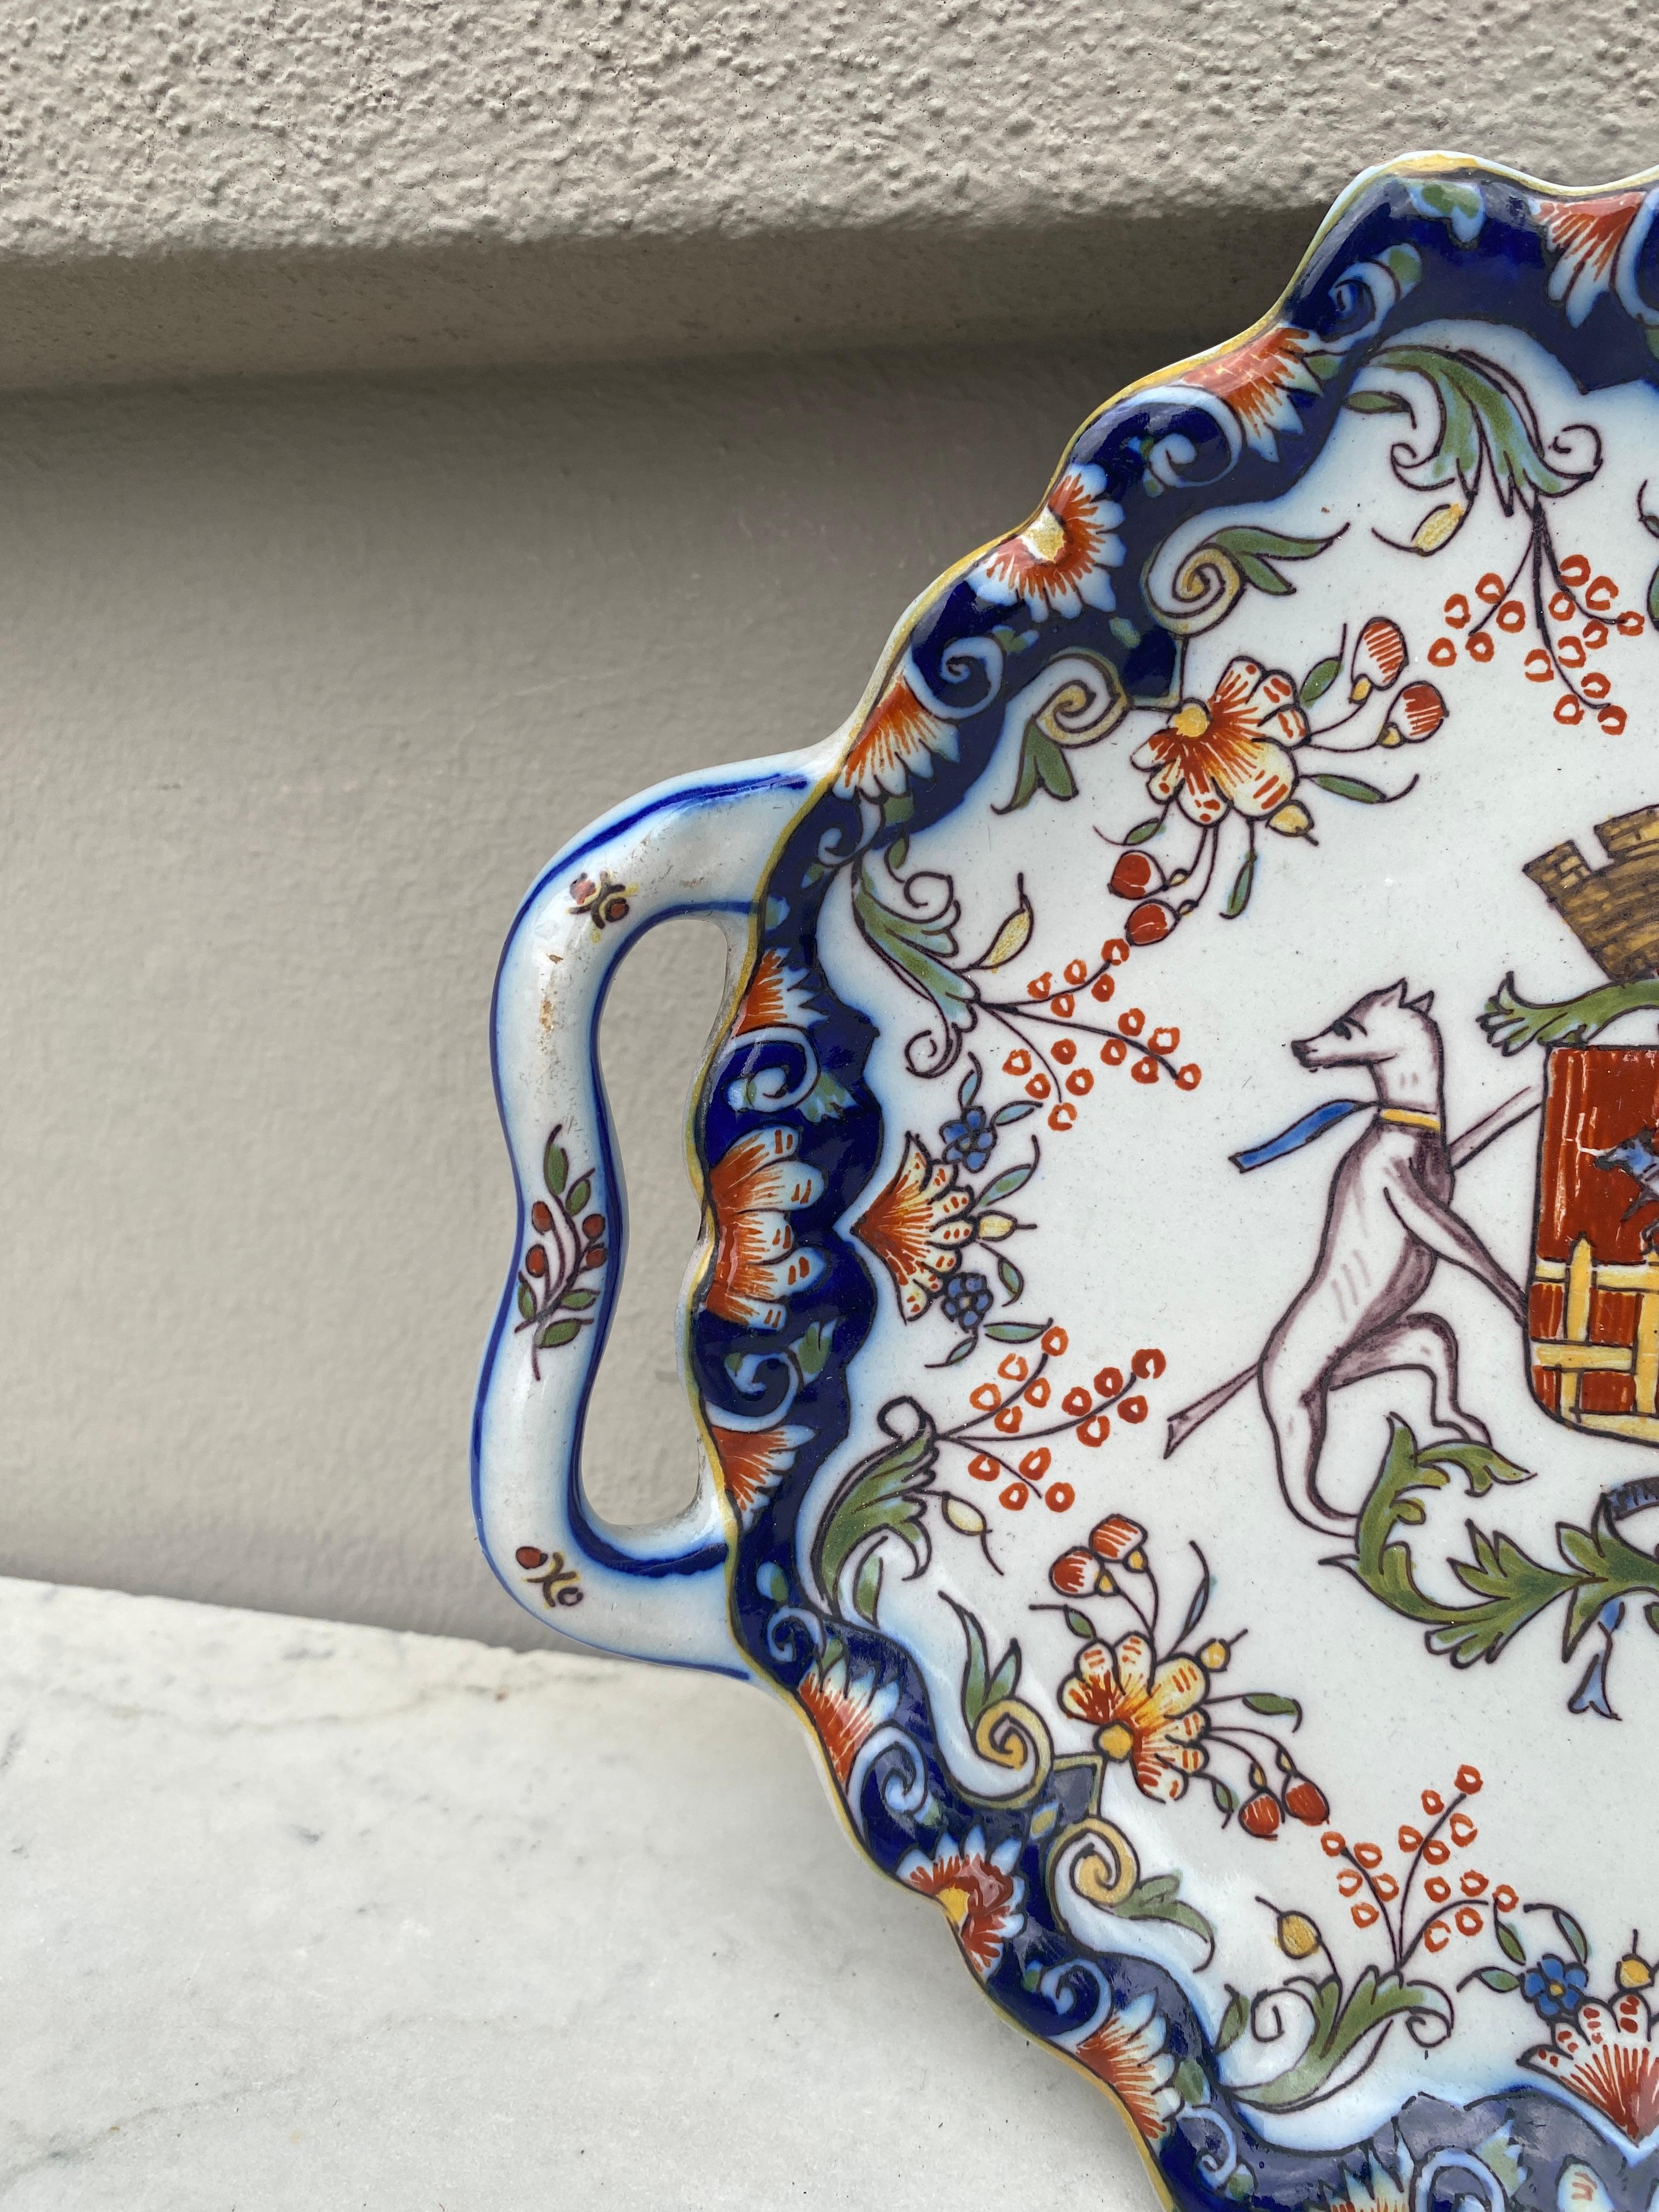 Antique French faience handled platter coat of arms wth dogs and floral pattern, circa 1900. 